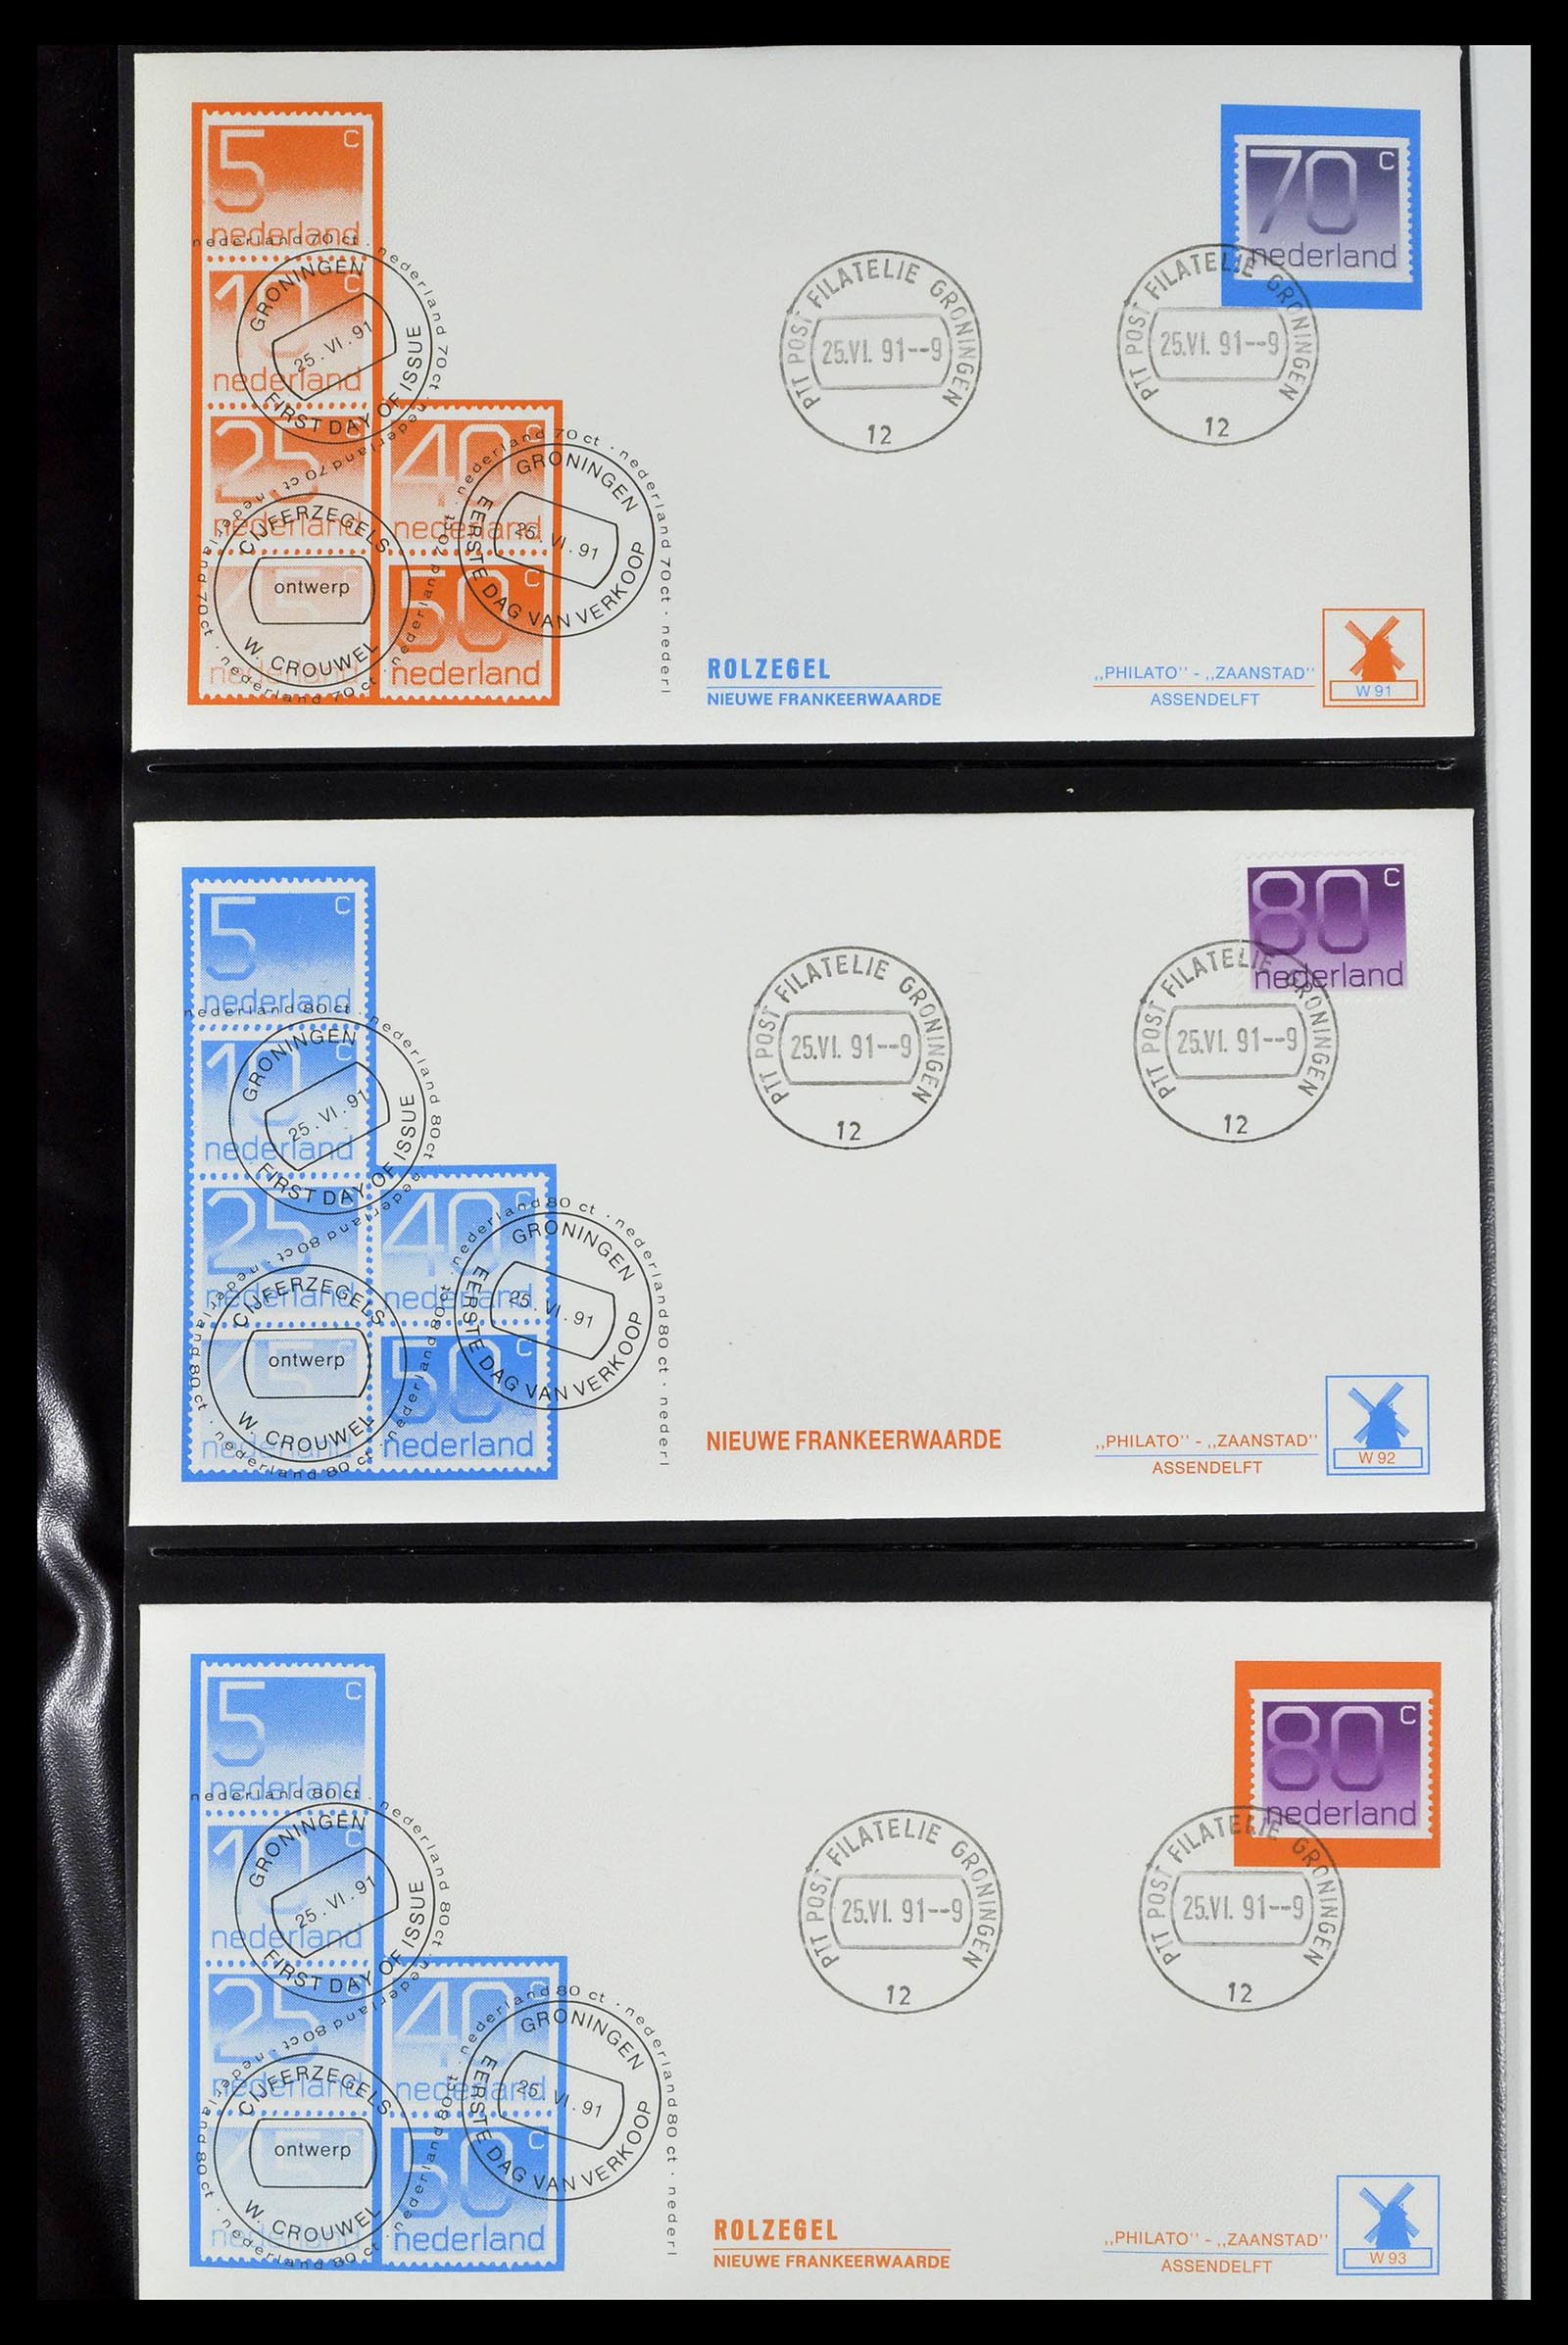 38559 0525 - Stamp collection 38559 Netherlands special first day covers.